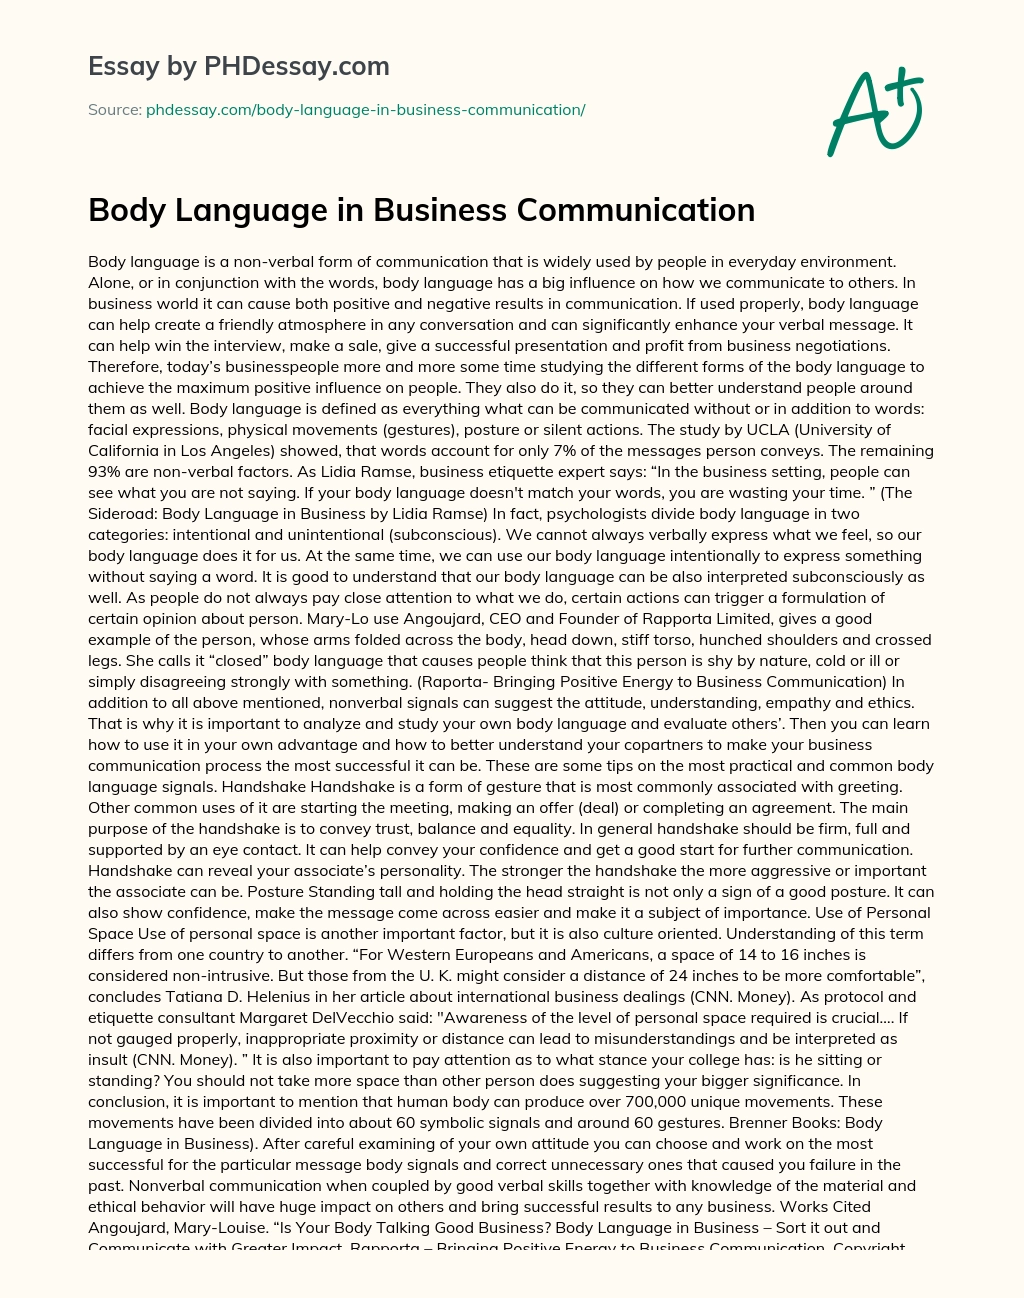 Body Language in Business Communication essay